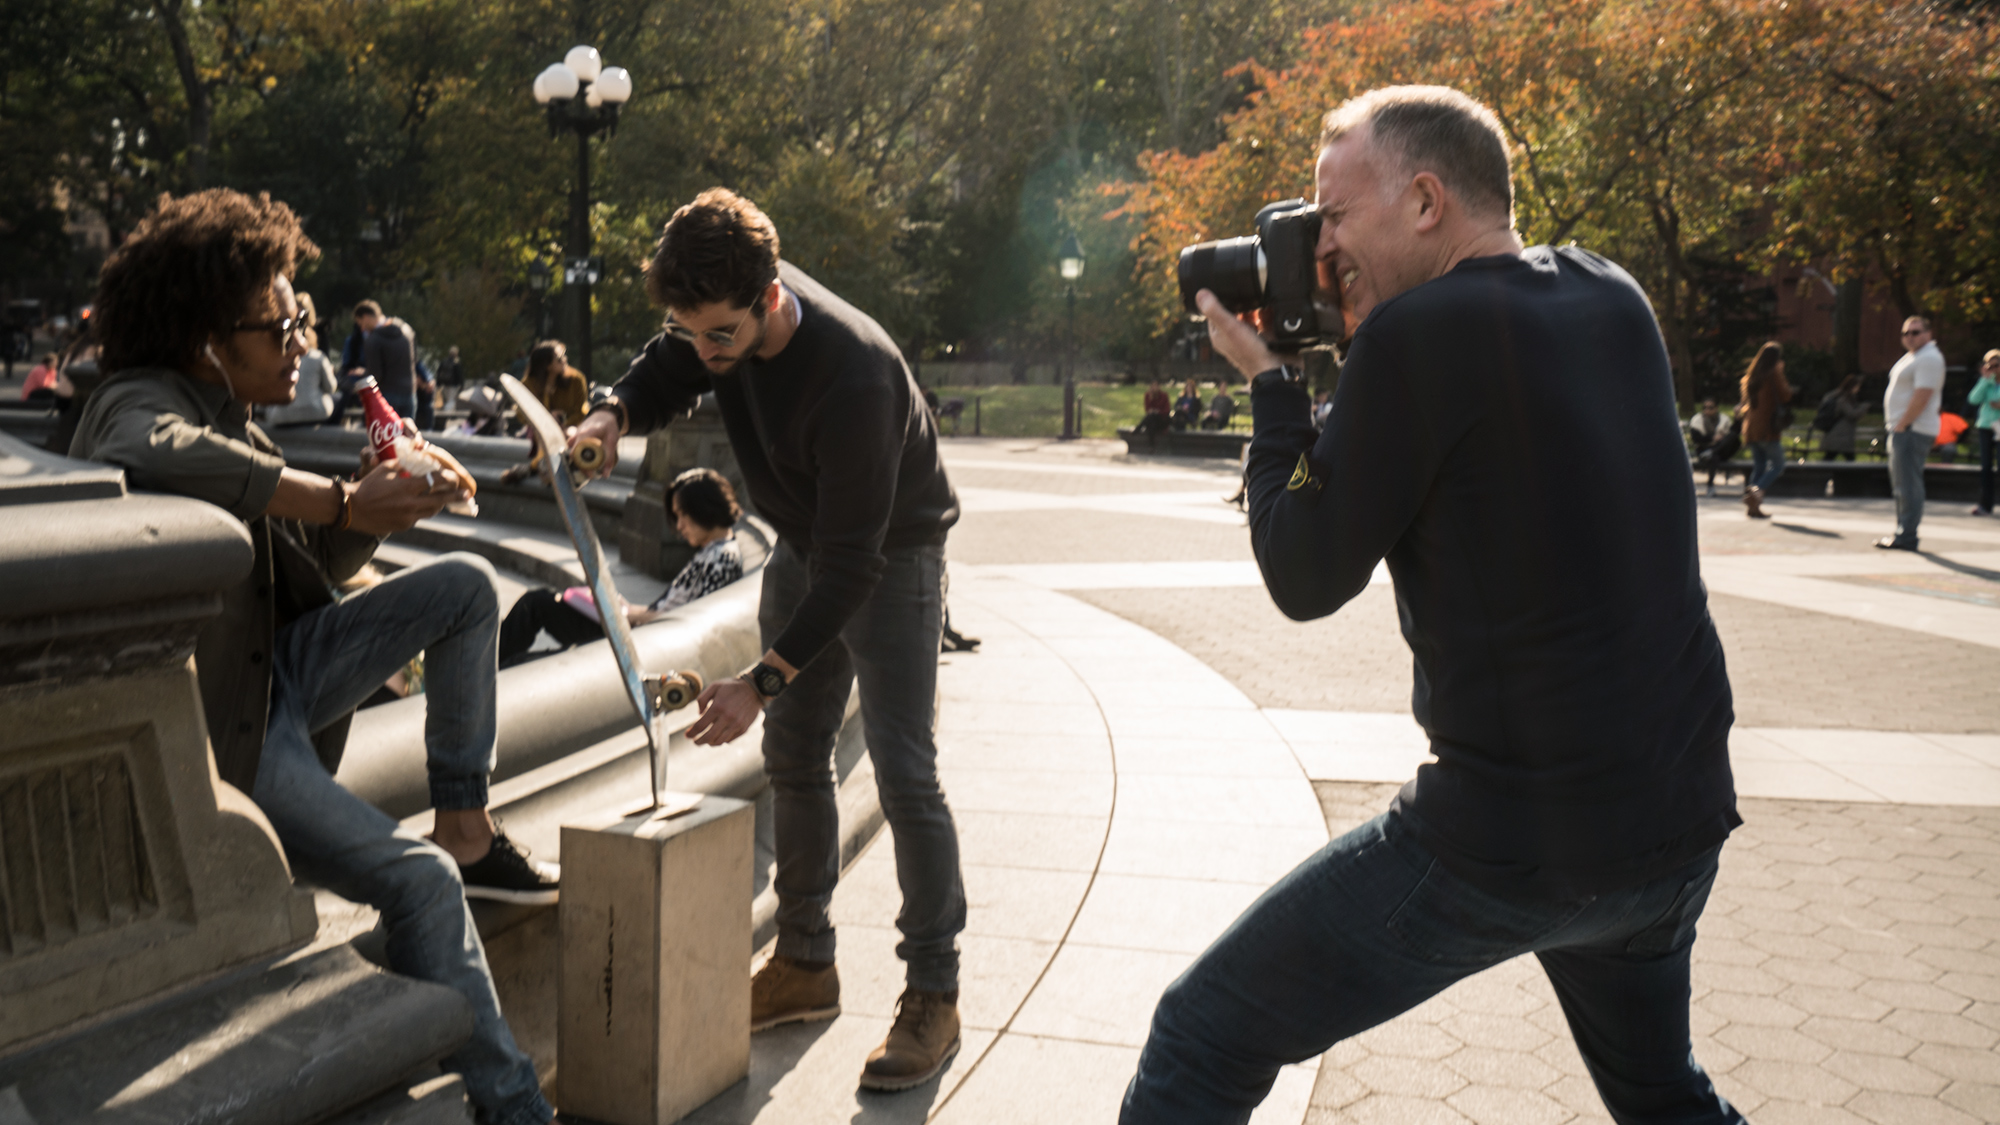 Me shooting for Coca-Cola in Washington Square Park, NYC...